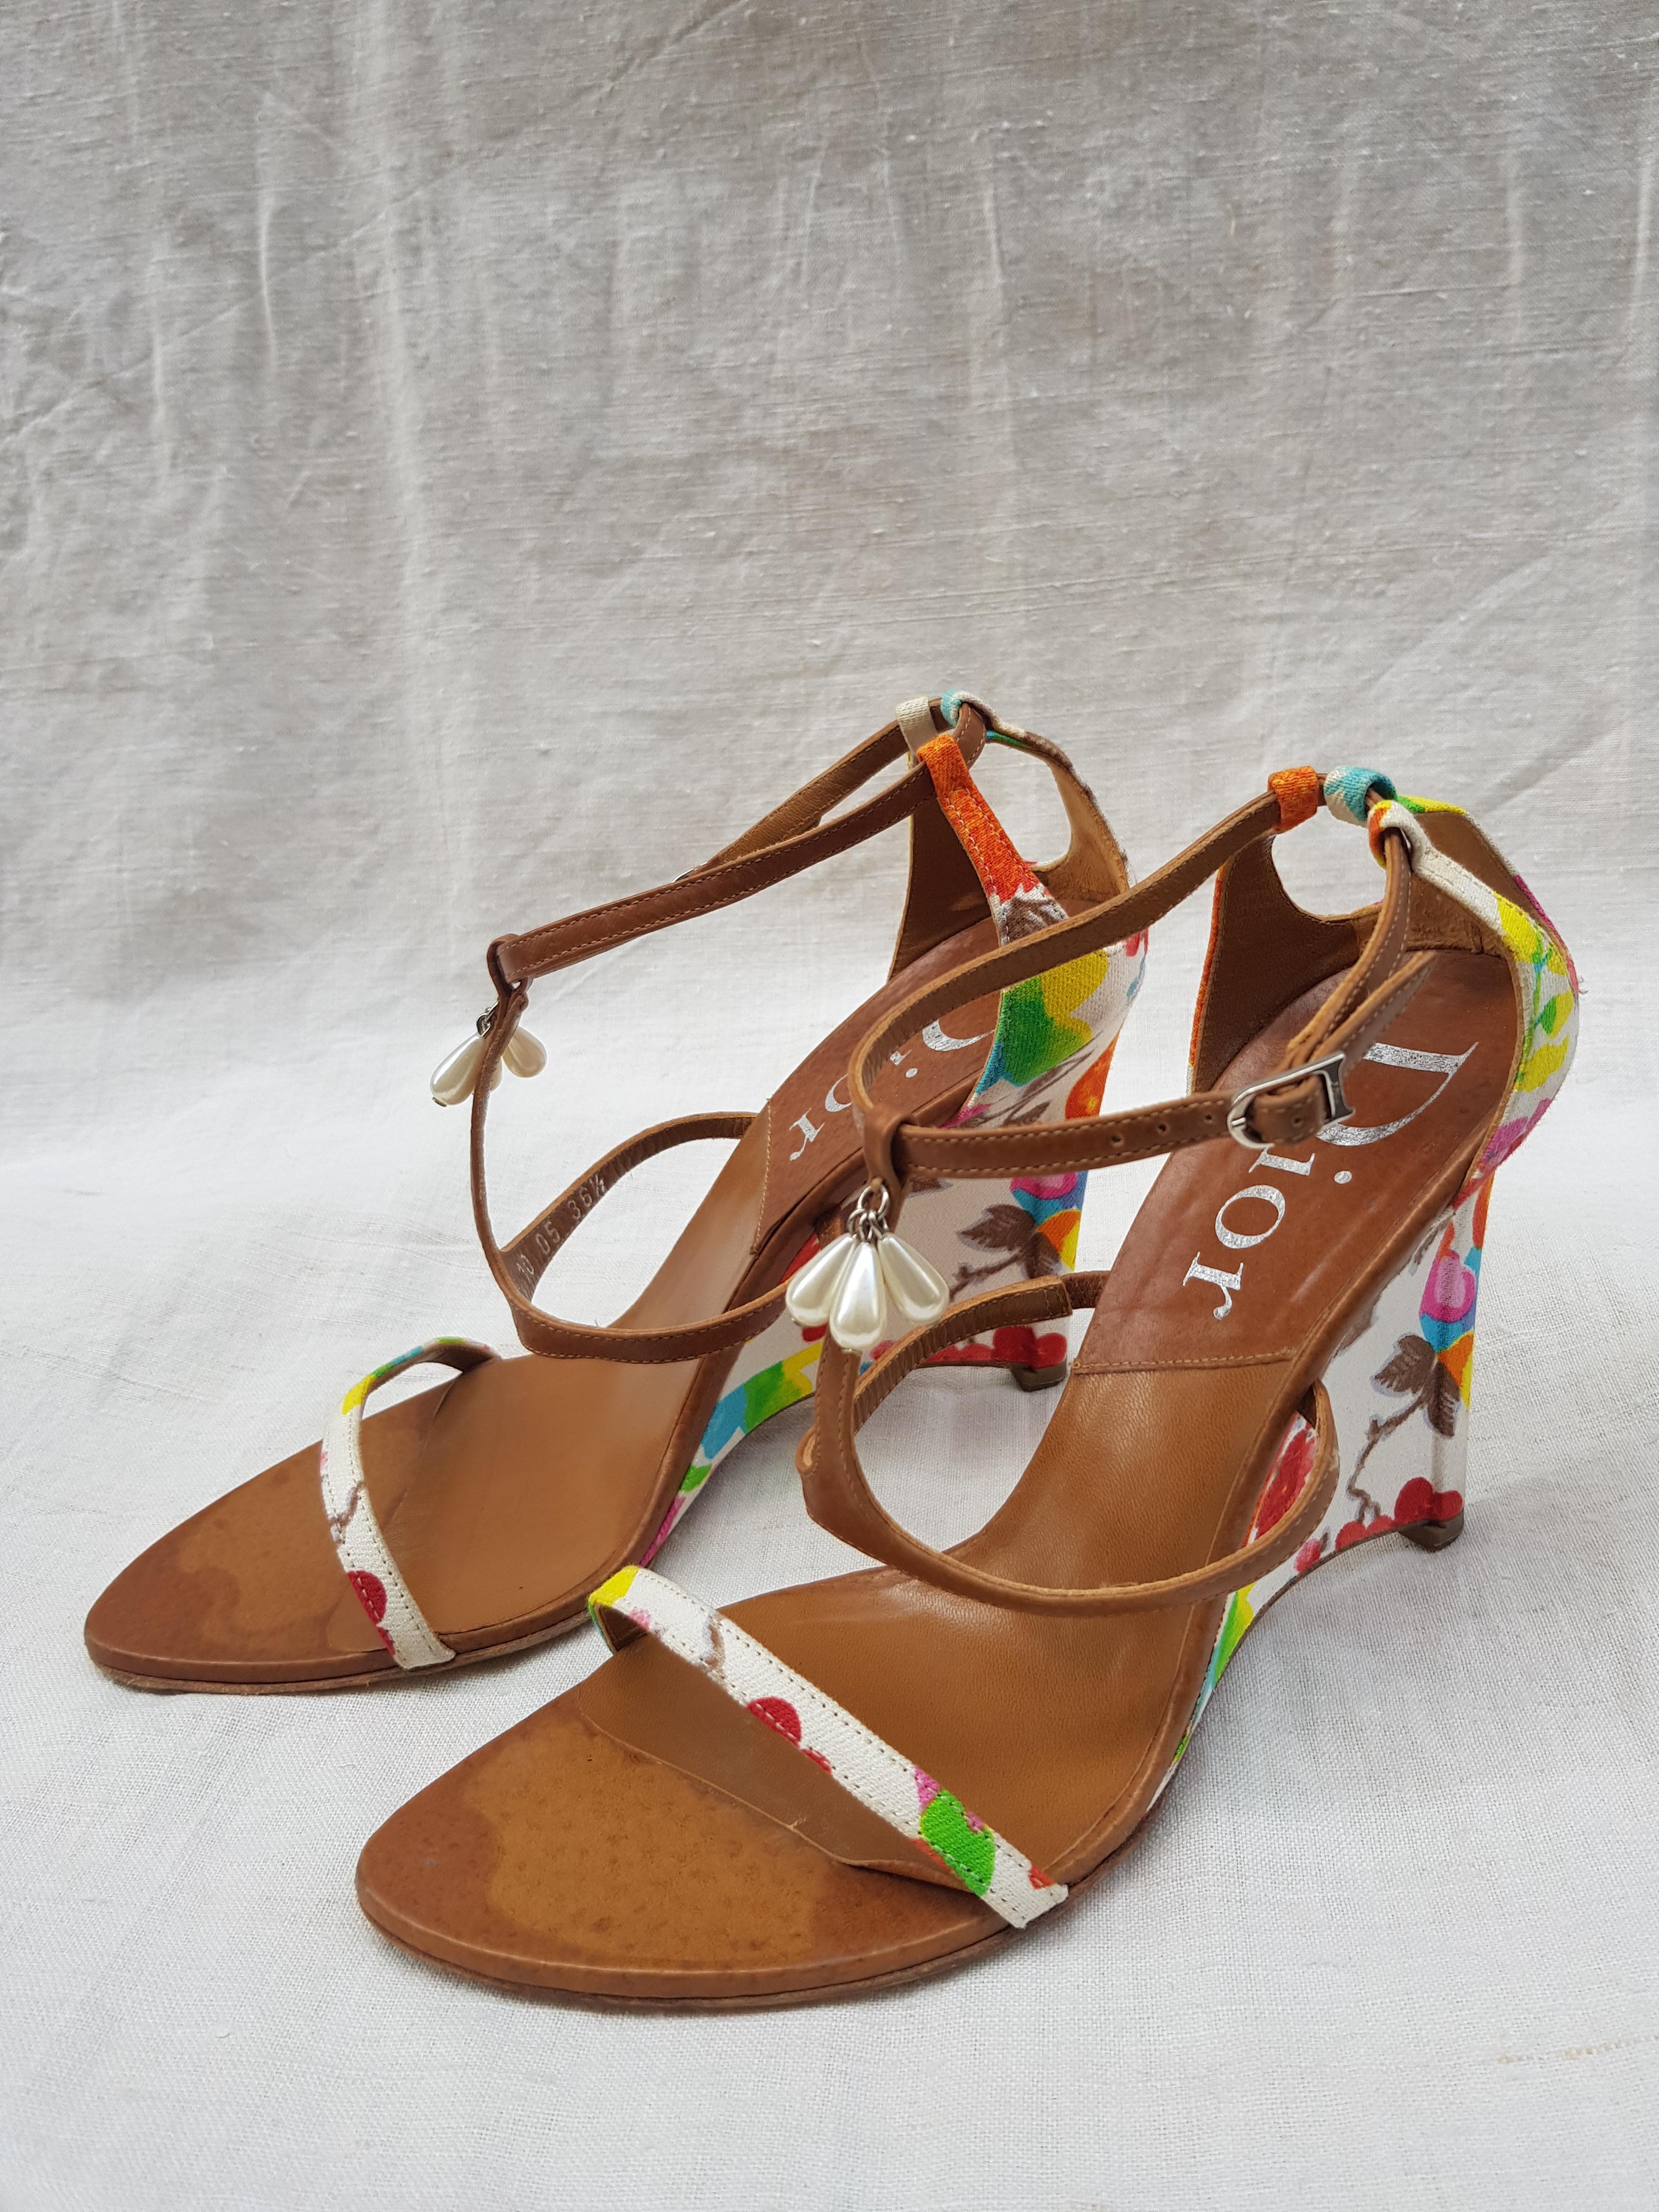 Wonderful pair of Christian Dior by John Galliano sandals with wedges covered by silk floral printed fabric and 3 front pearls at the ankle.
Condition is really good, only some stains in the front leather part due to a silicon sole but covered by